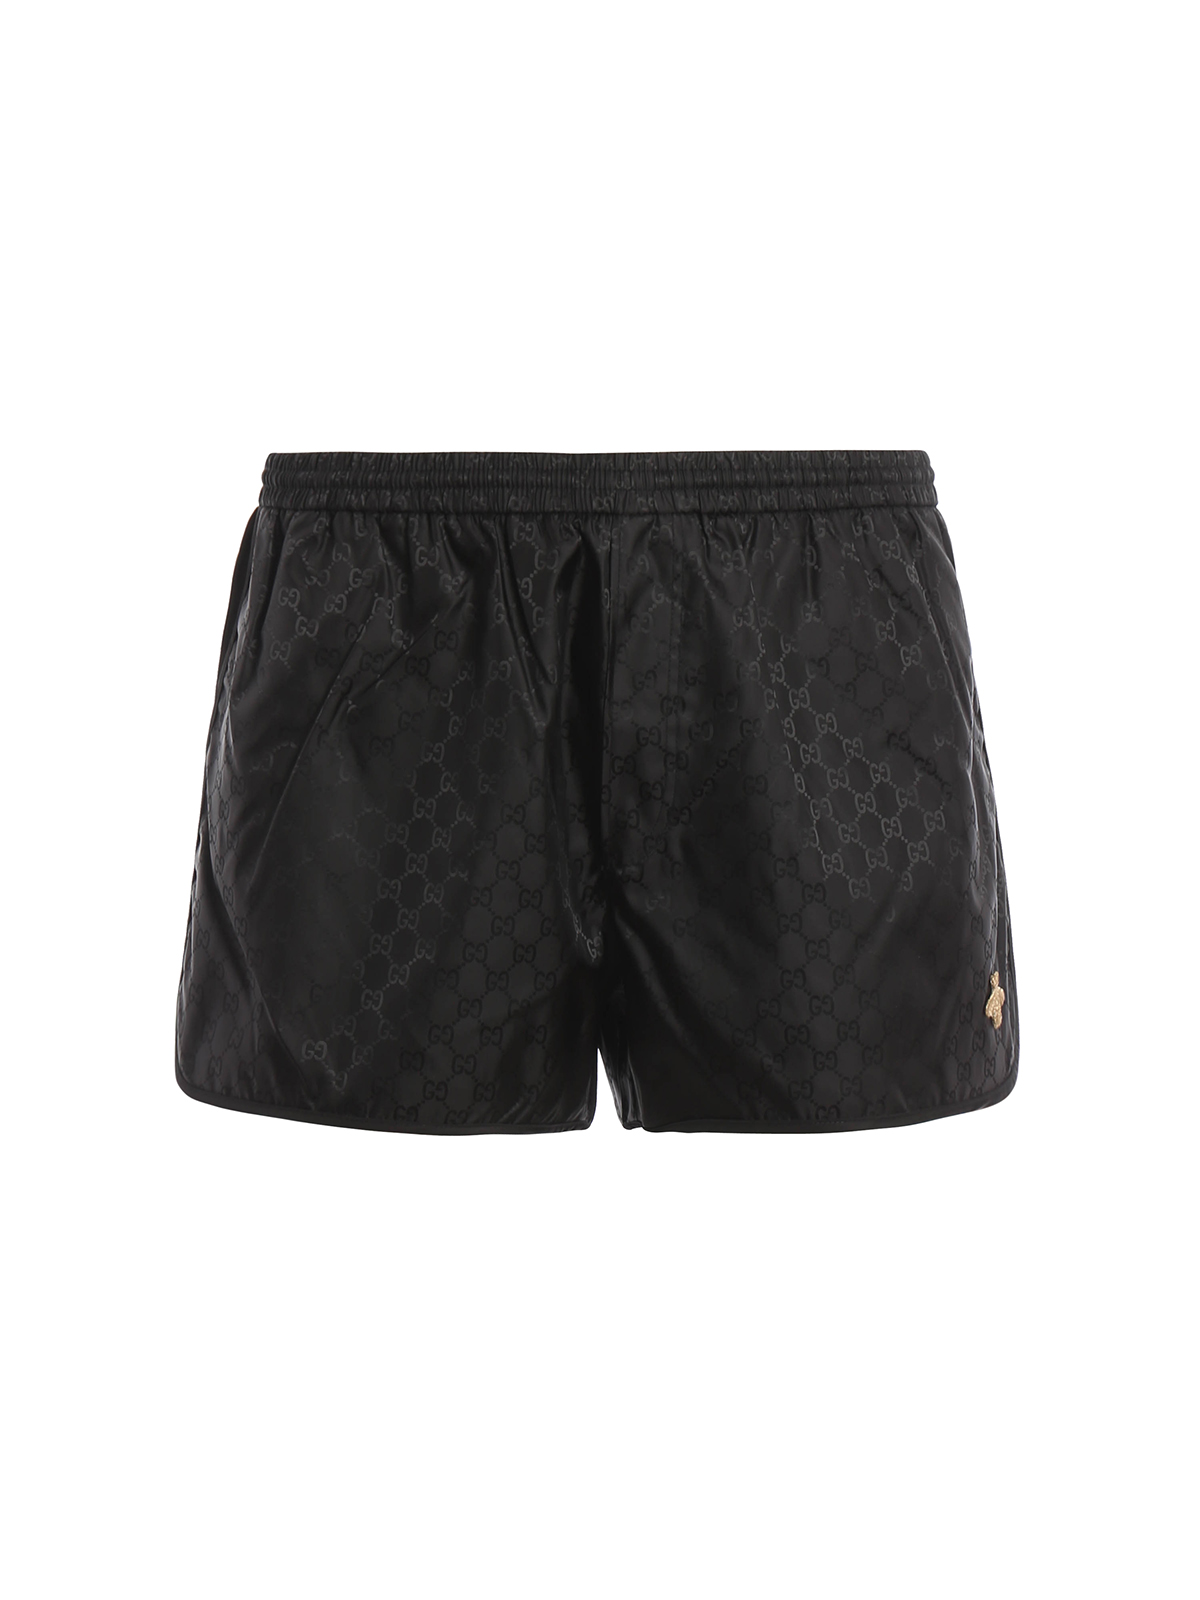 Embroidered bee GG swim shorts by Gucci - Swim shorts & swimming trunks | iKRIX